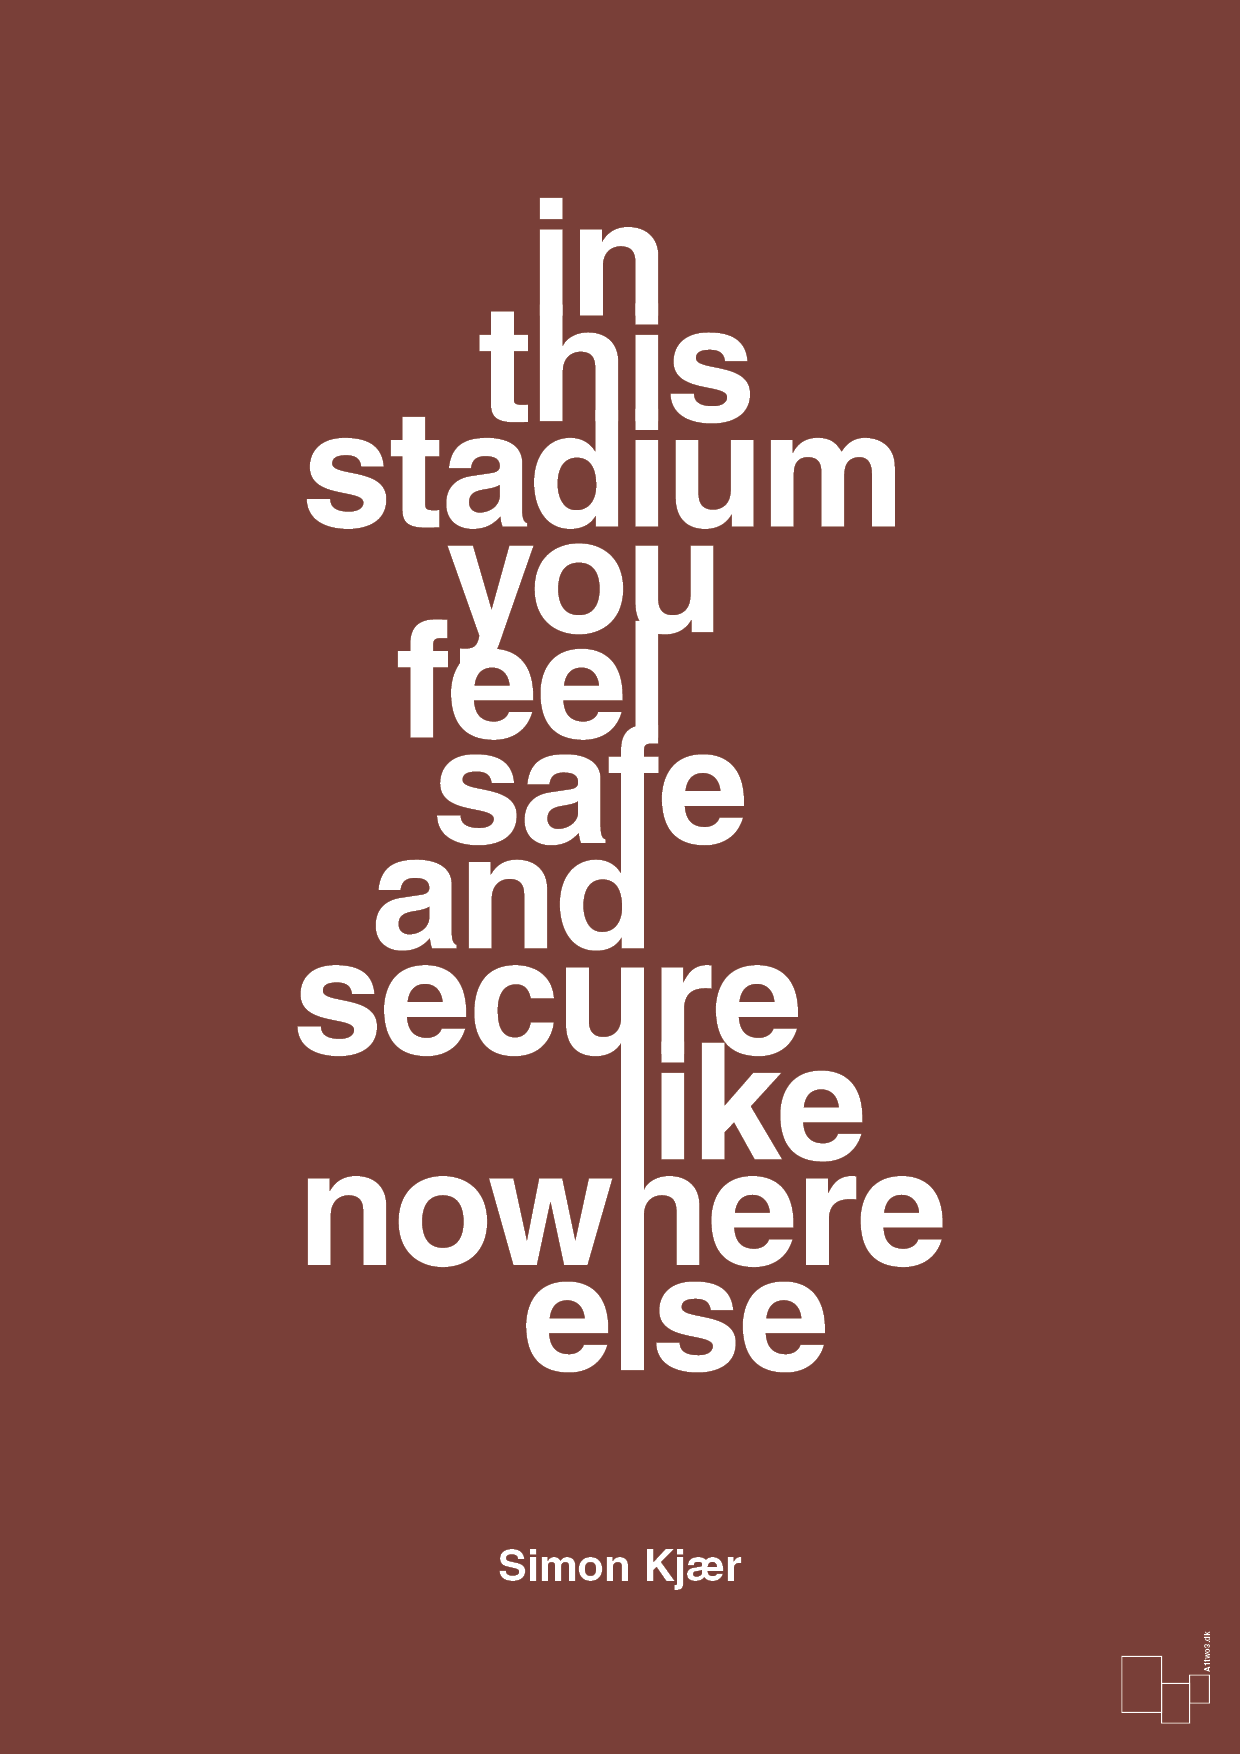 in this stadium you feel safe and secure like nowhere else - Plakat med Citater i Red Pepper